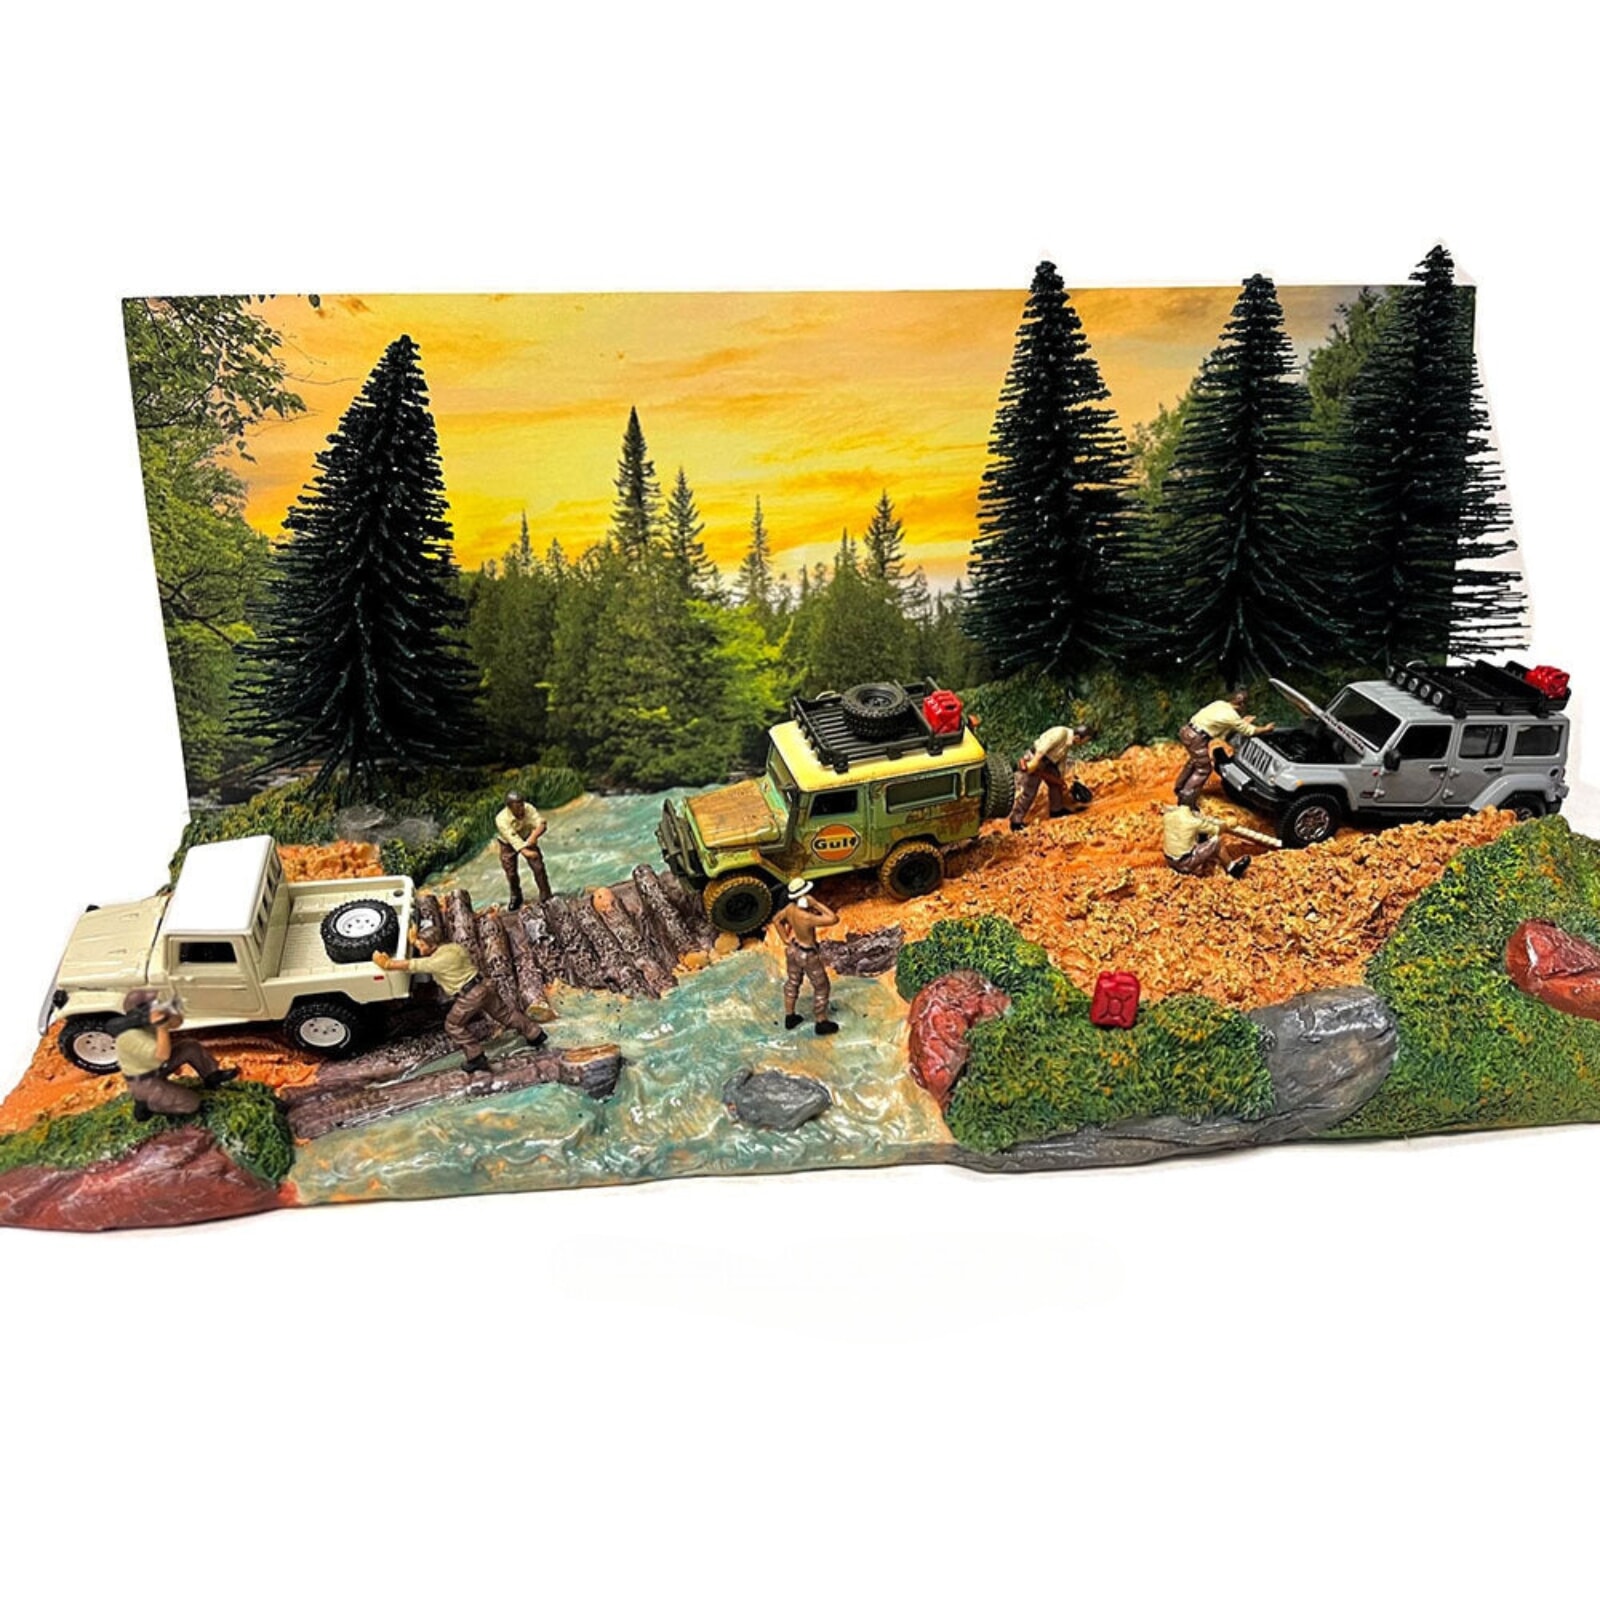 Overland Off Road Diorama 1:64 scale Display Diorama by American